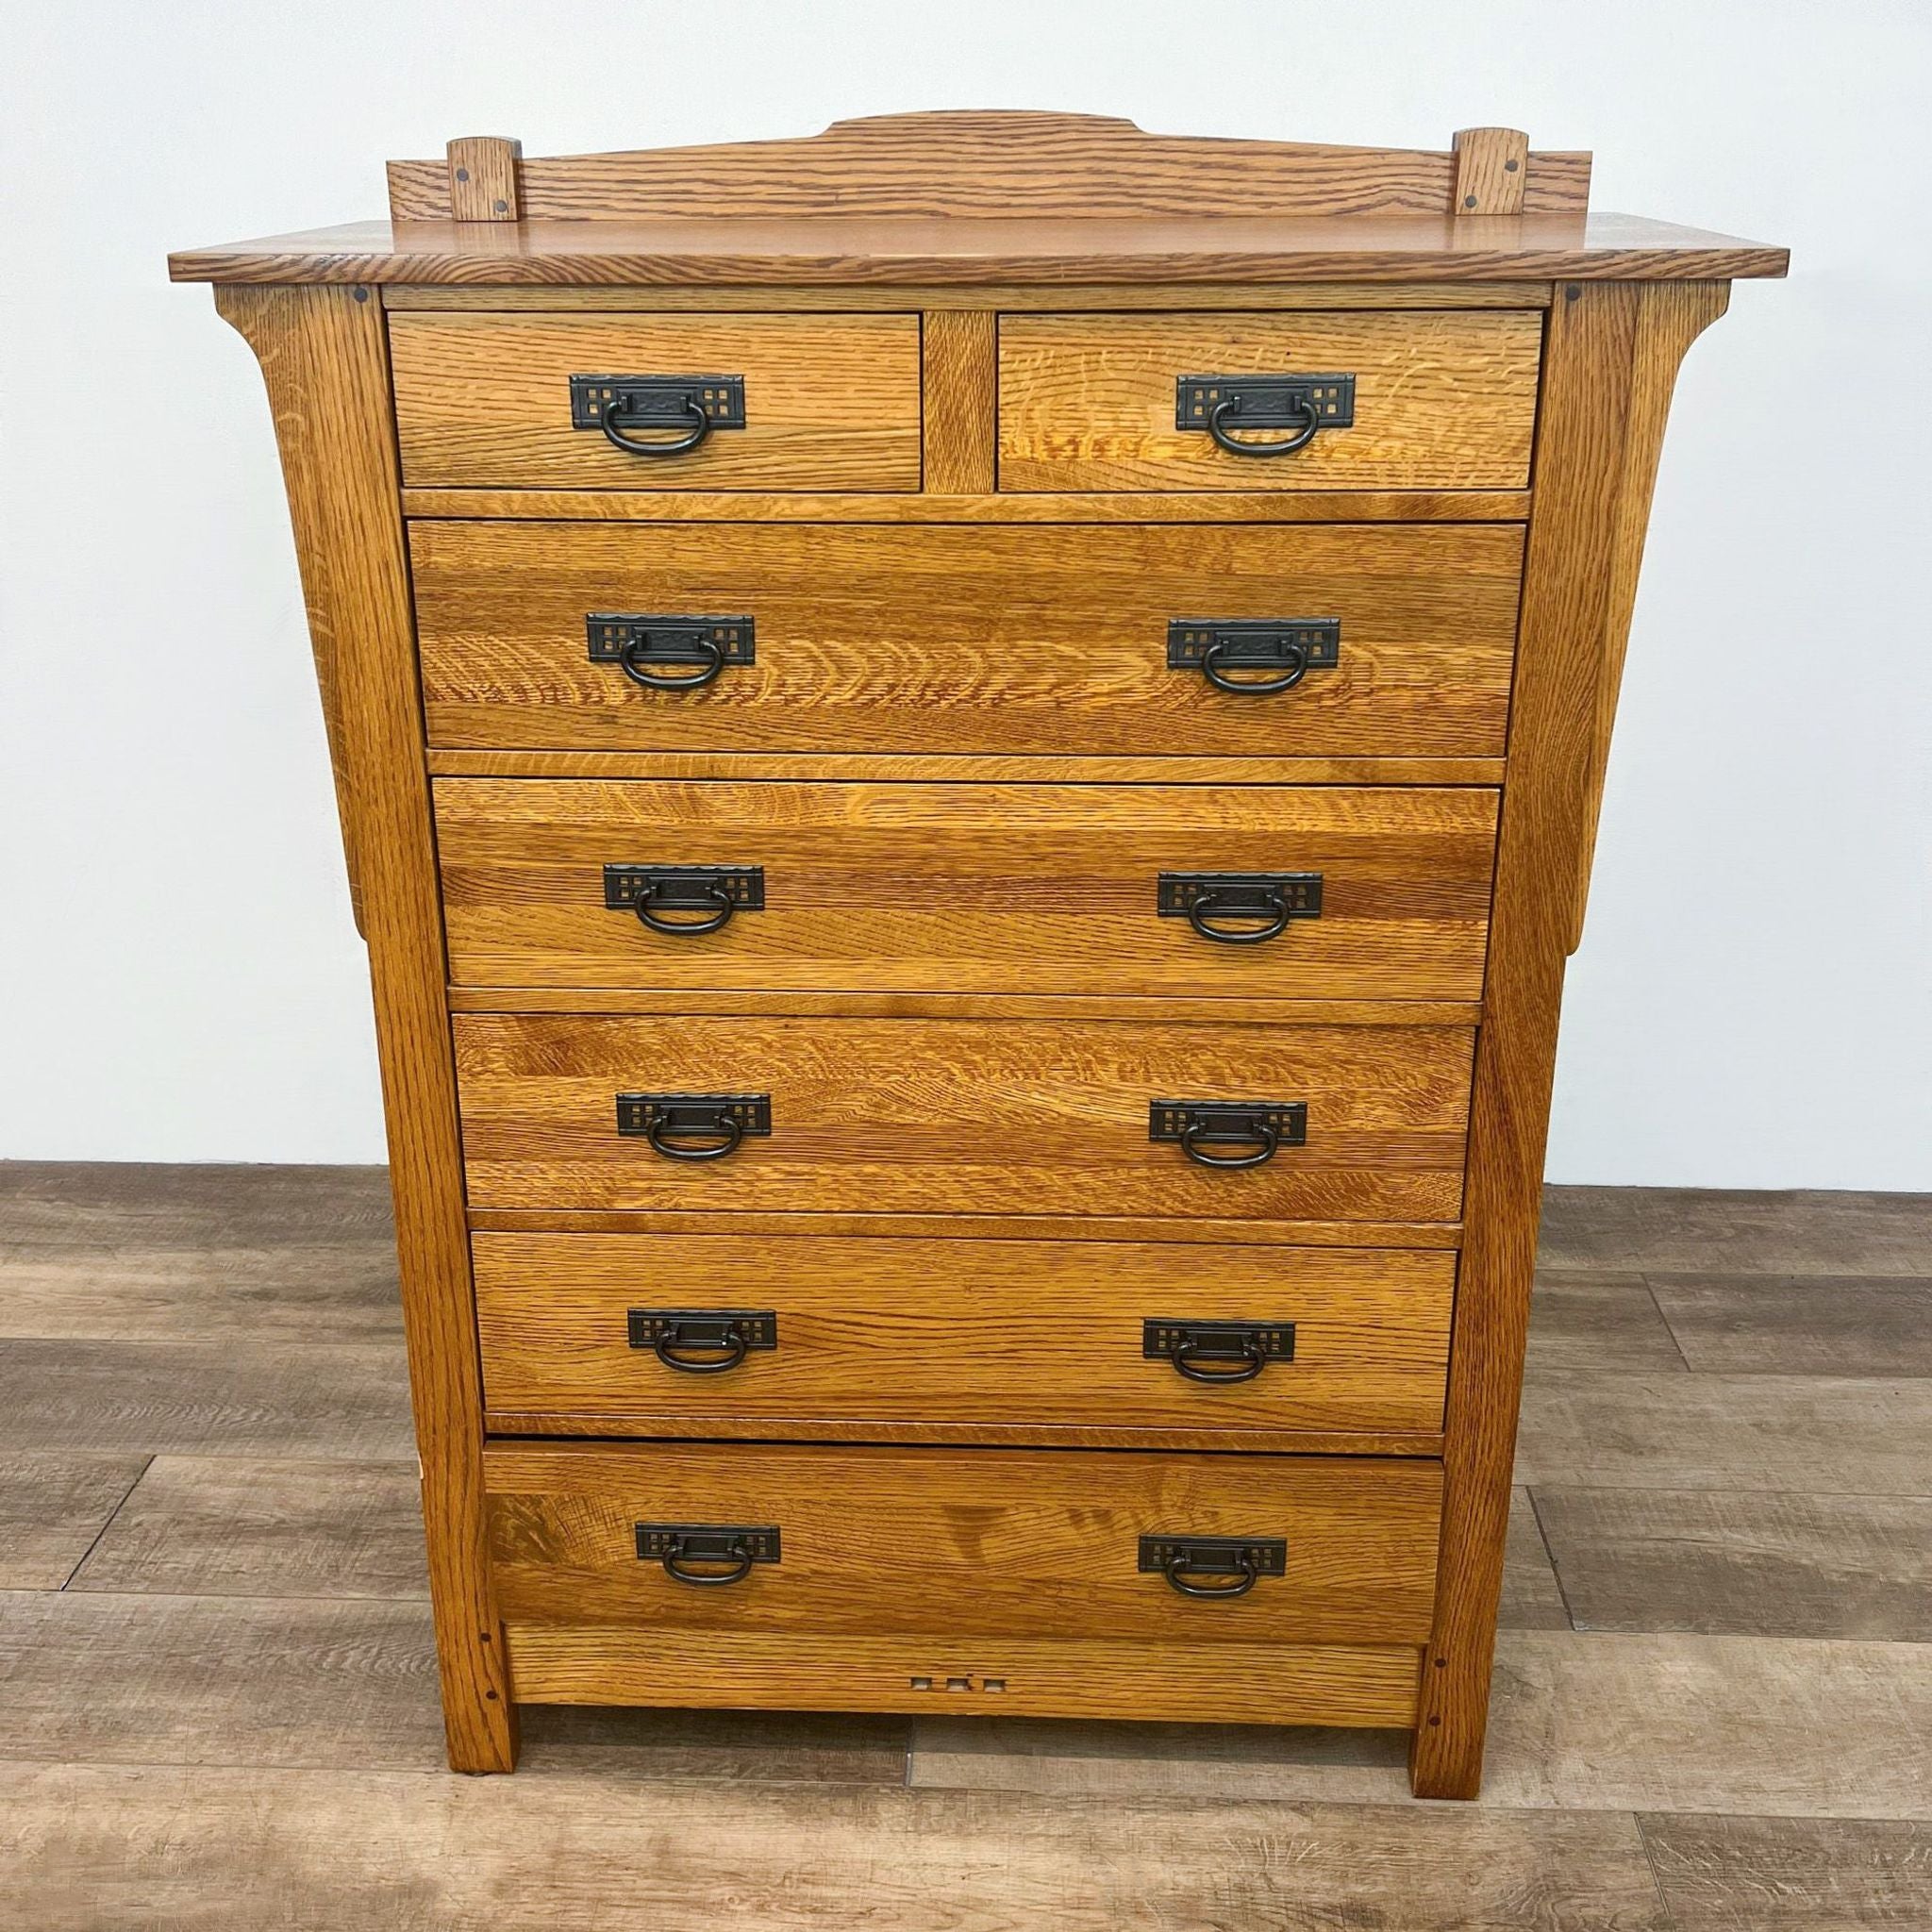 Alt text 1: Royal Craftsman solid wood, mission style 7-drawer chest with metal pulls and dovetail joints, front view.